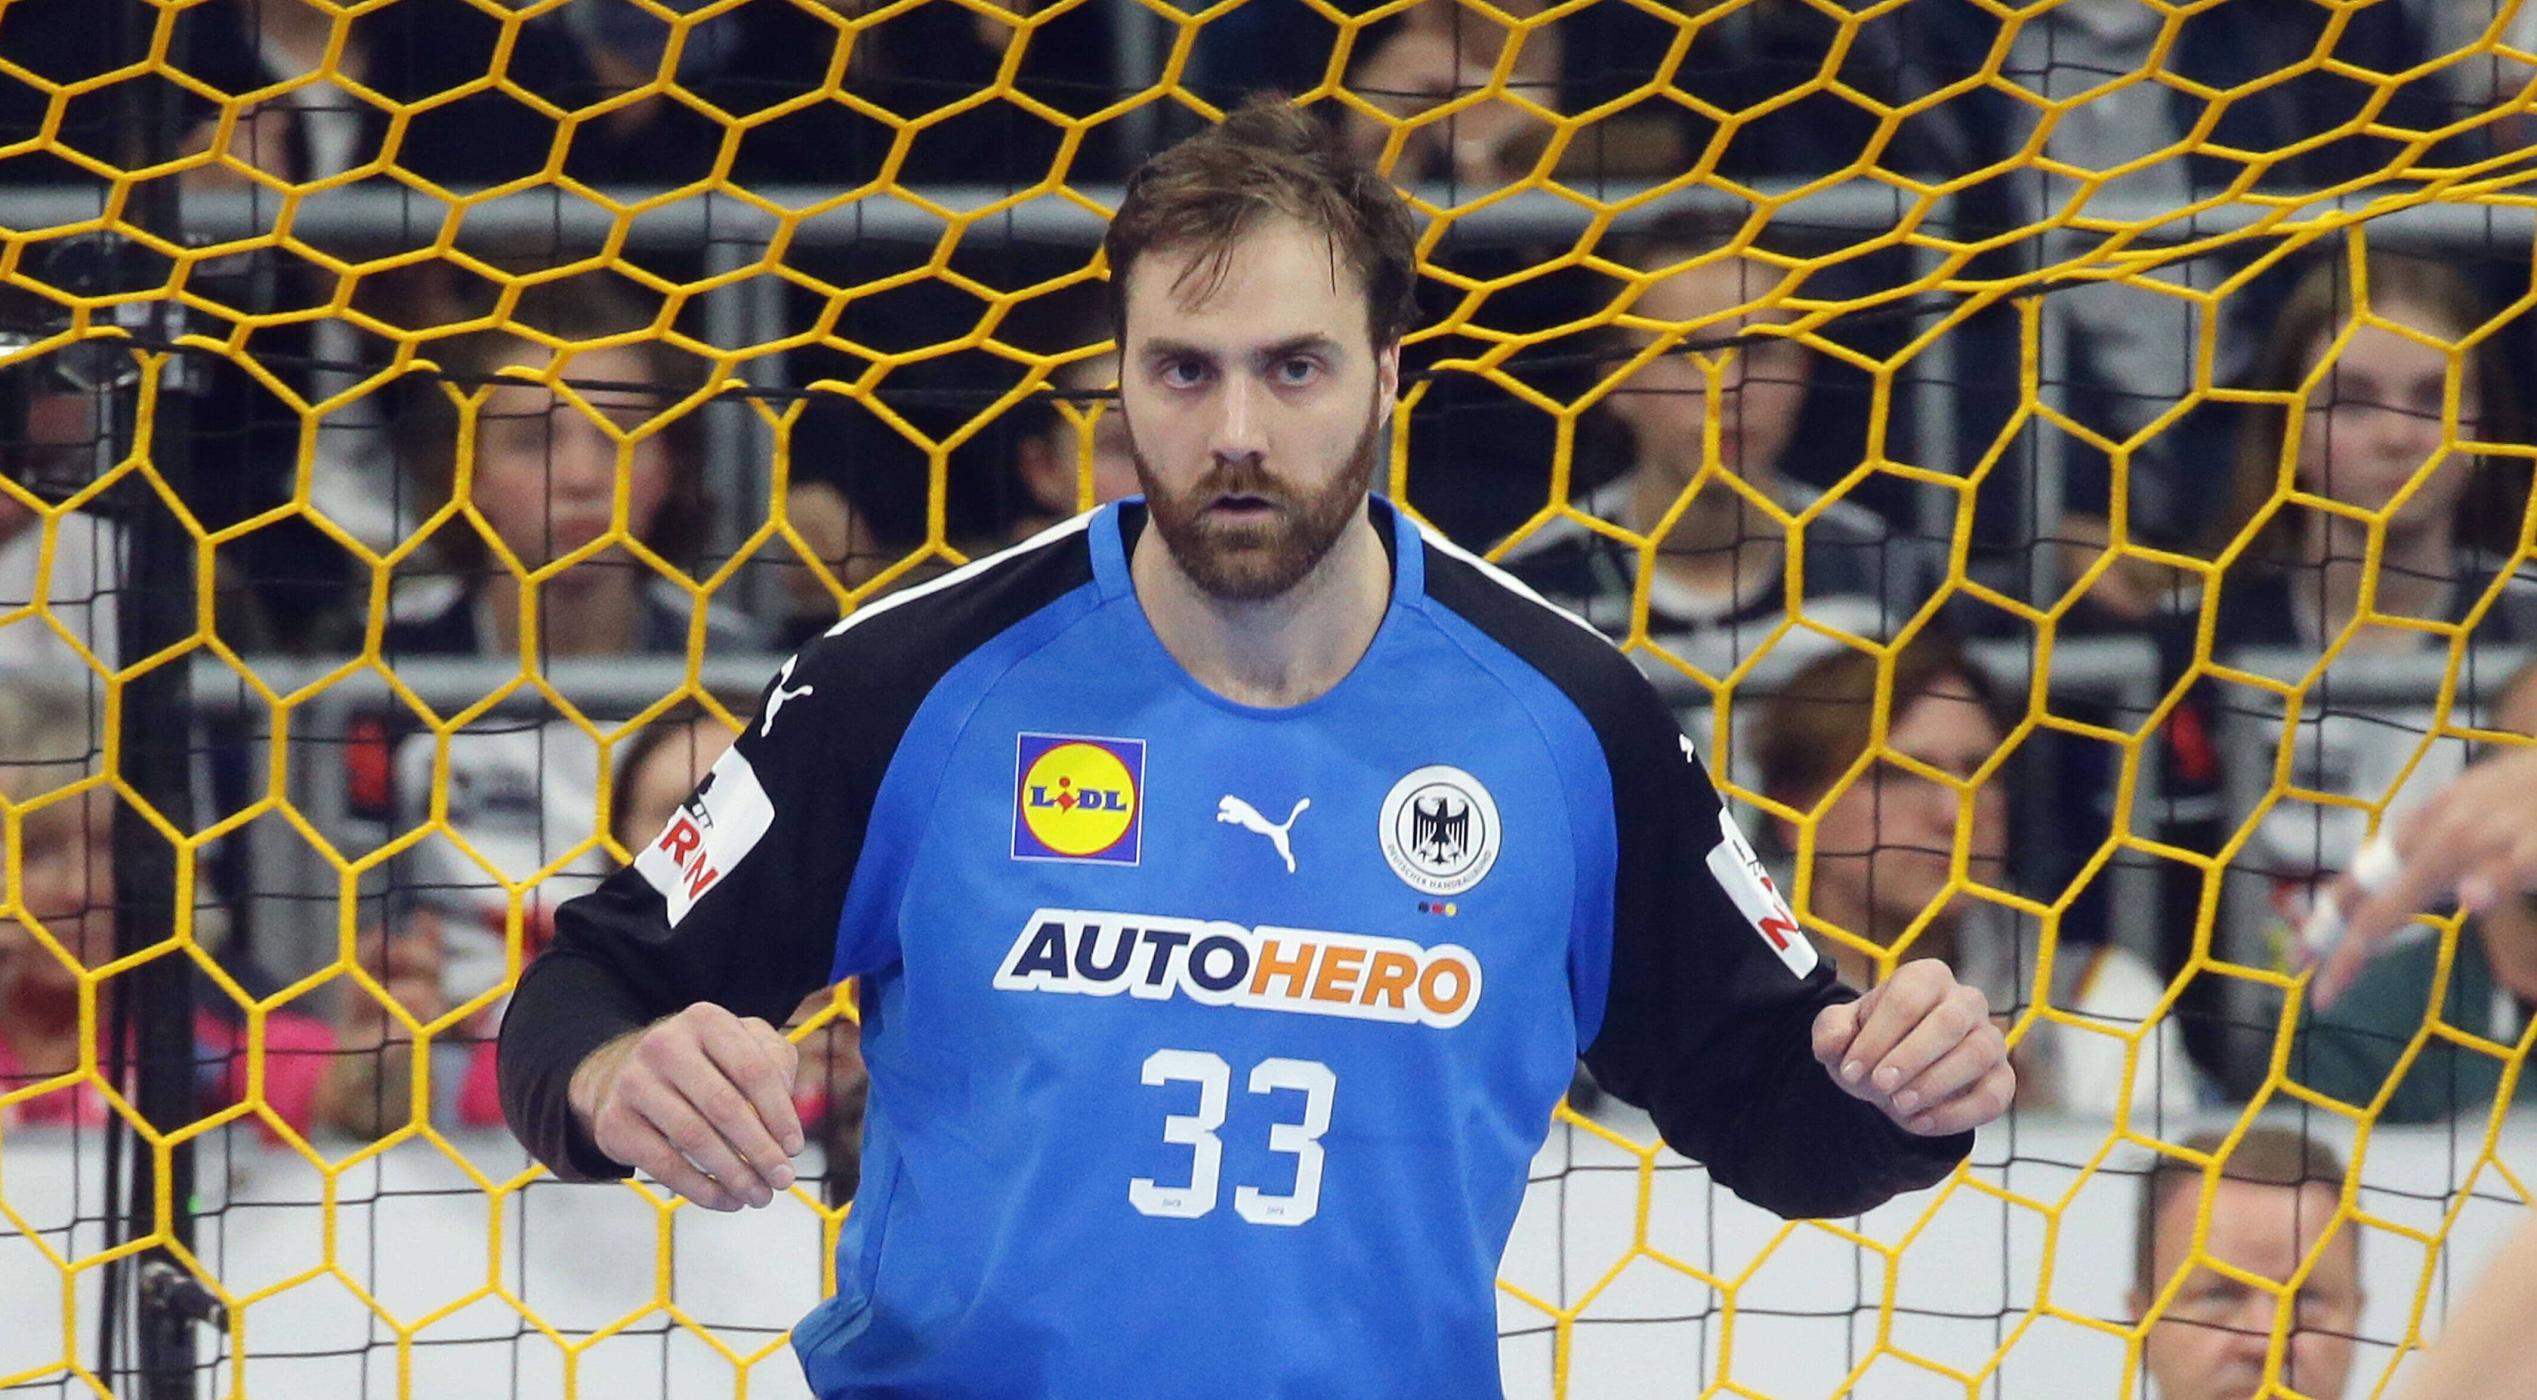 DHB-Keeper Andreas Wolff